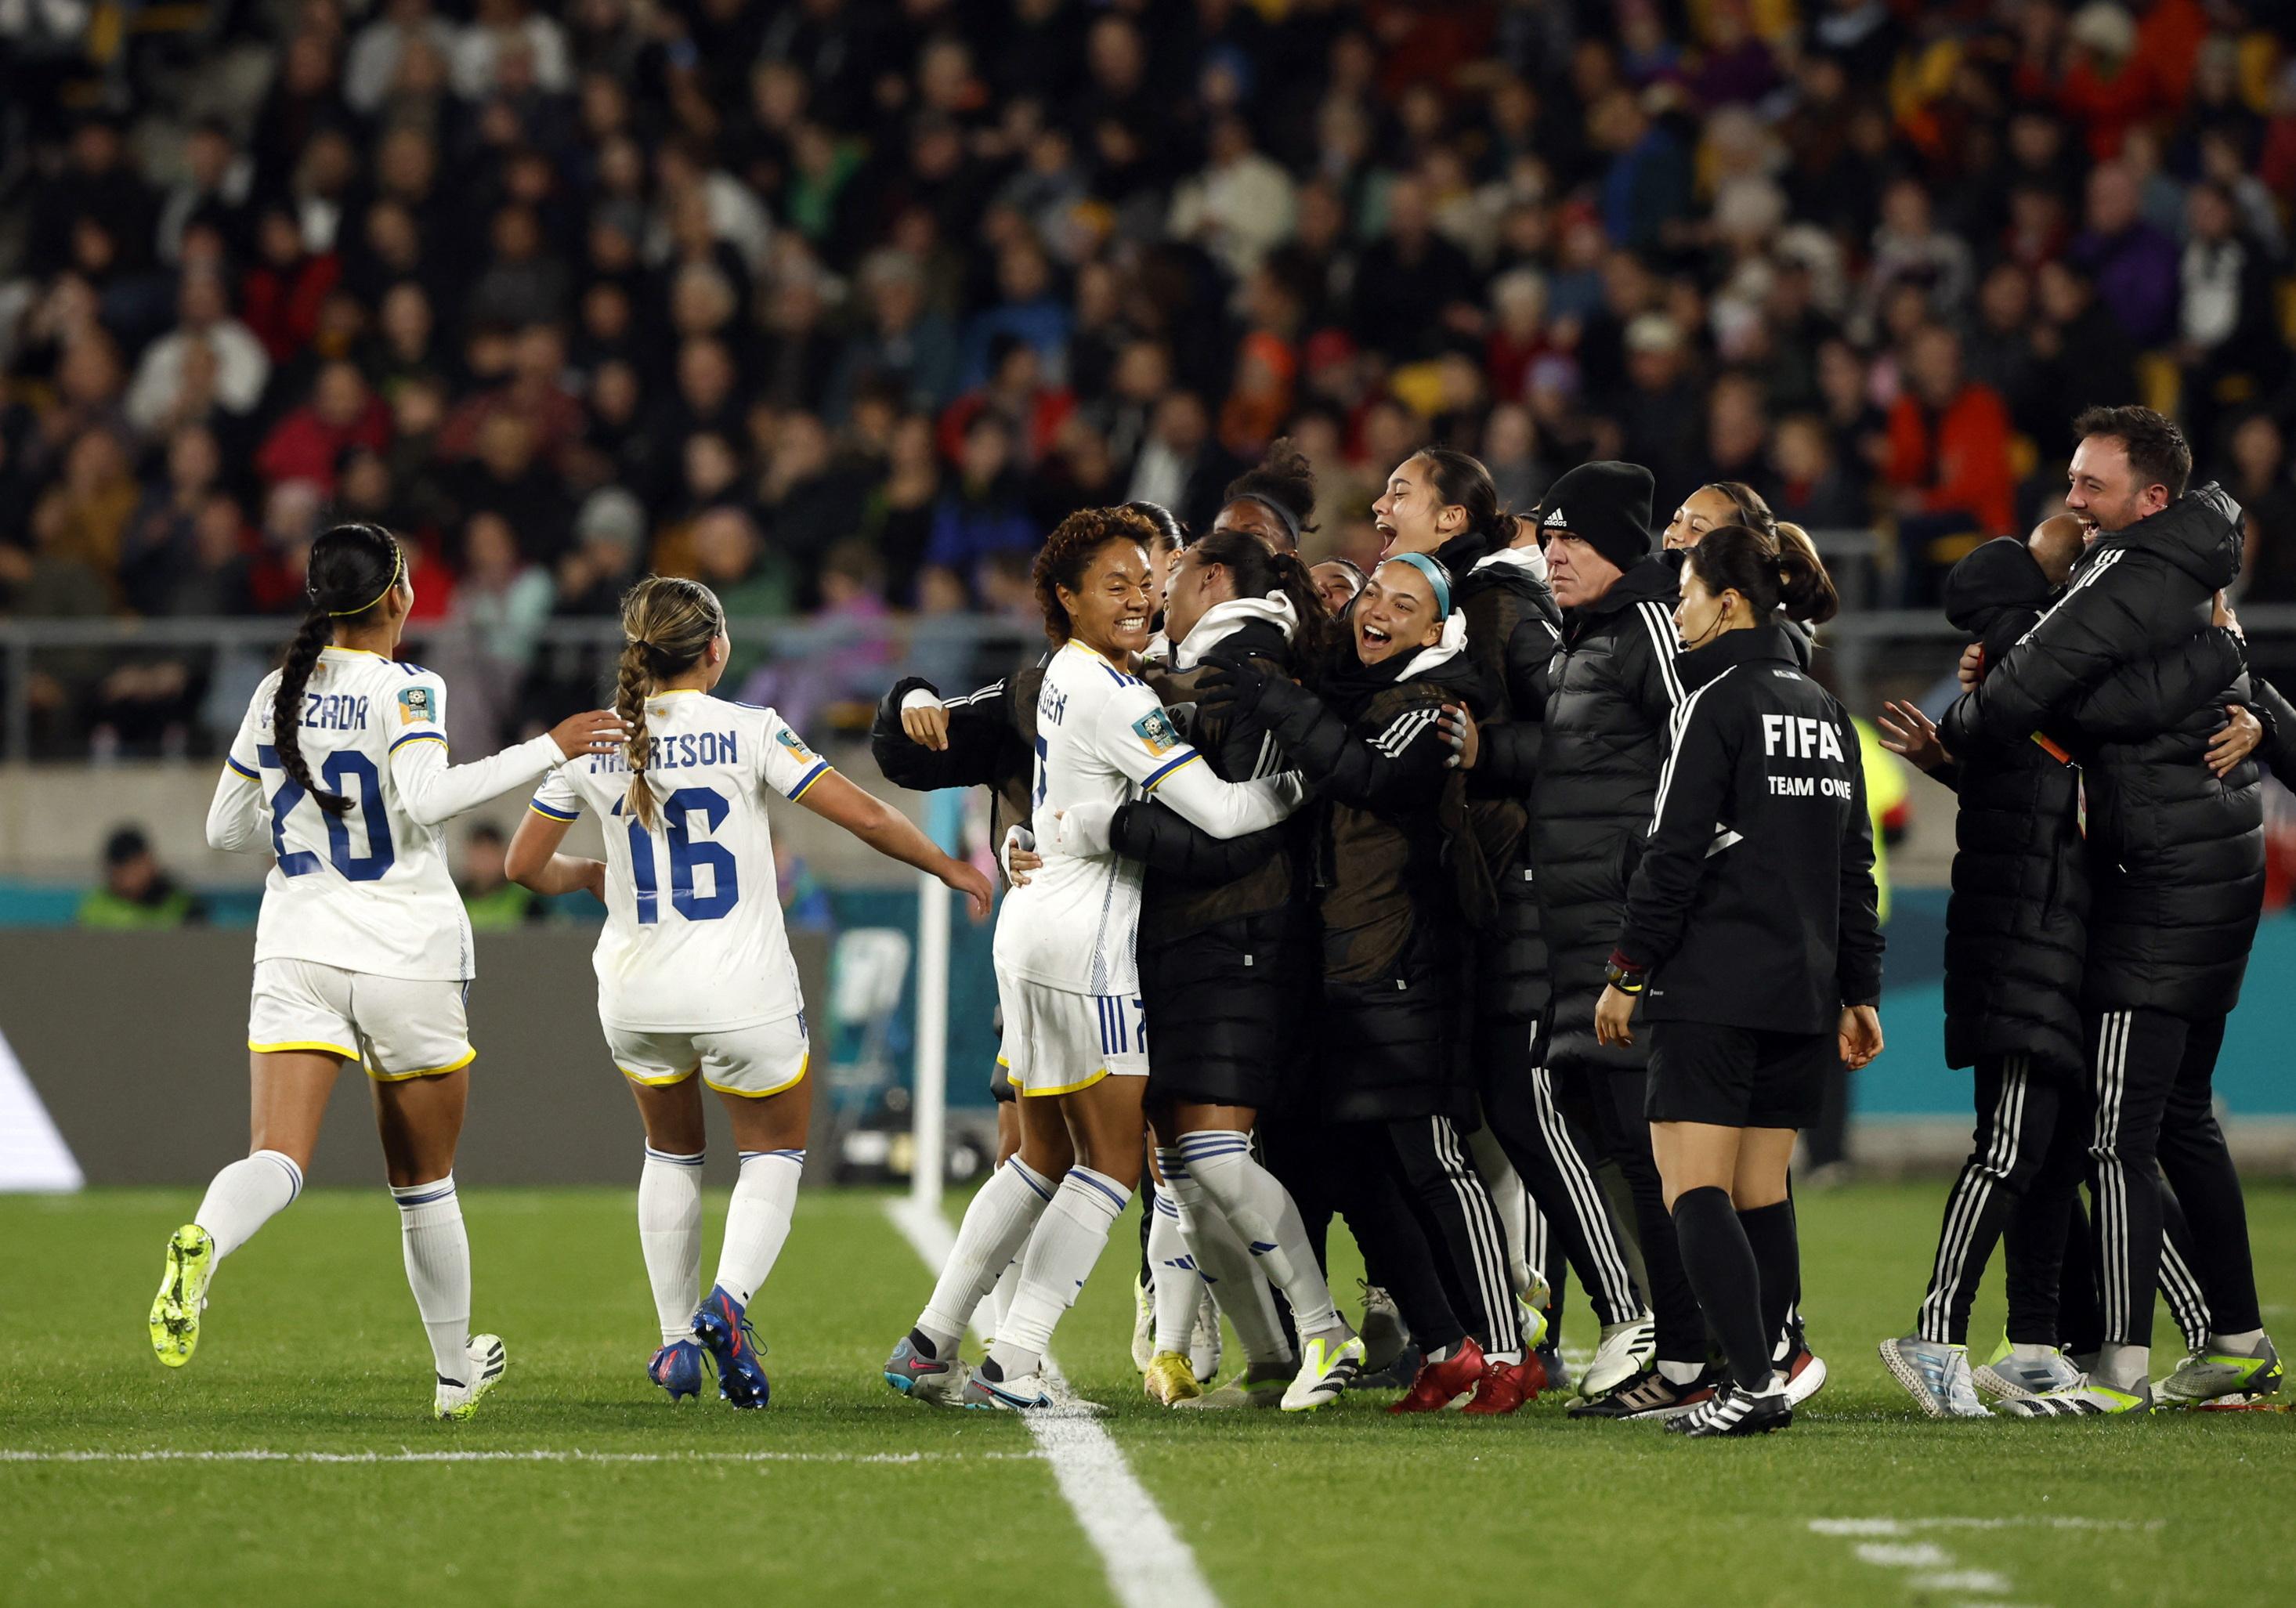 Sarina Bolden believes 'anything is possible' for Filipinas after first FIFA Women's World Cup win thumbnail